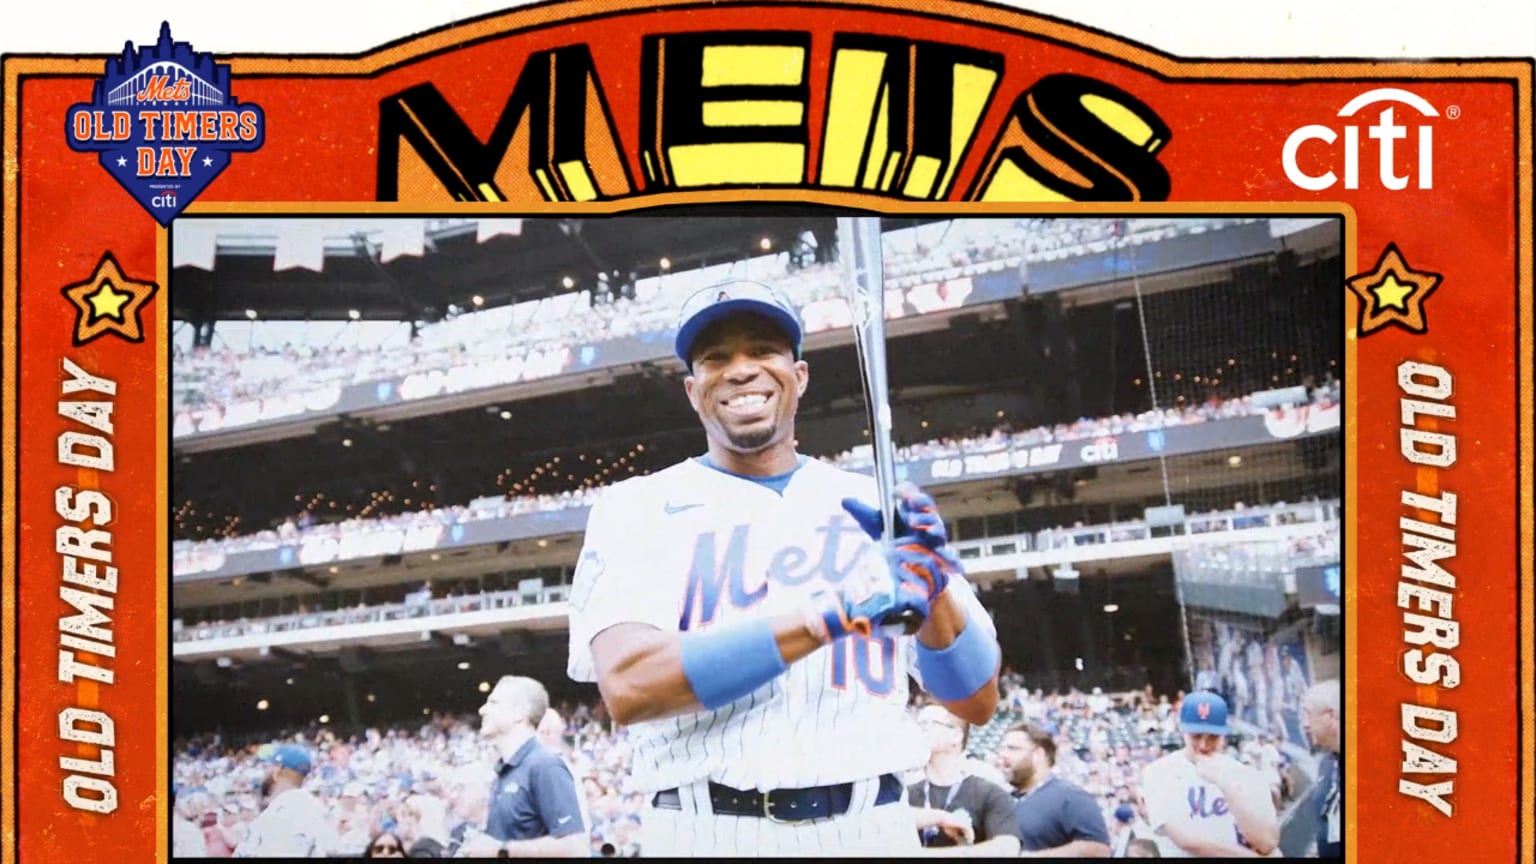 A Look at Mets Old Timers' Day, 08/28/2022